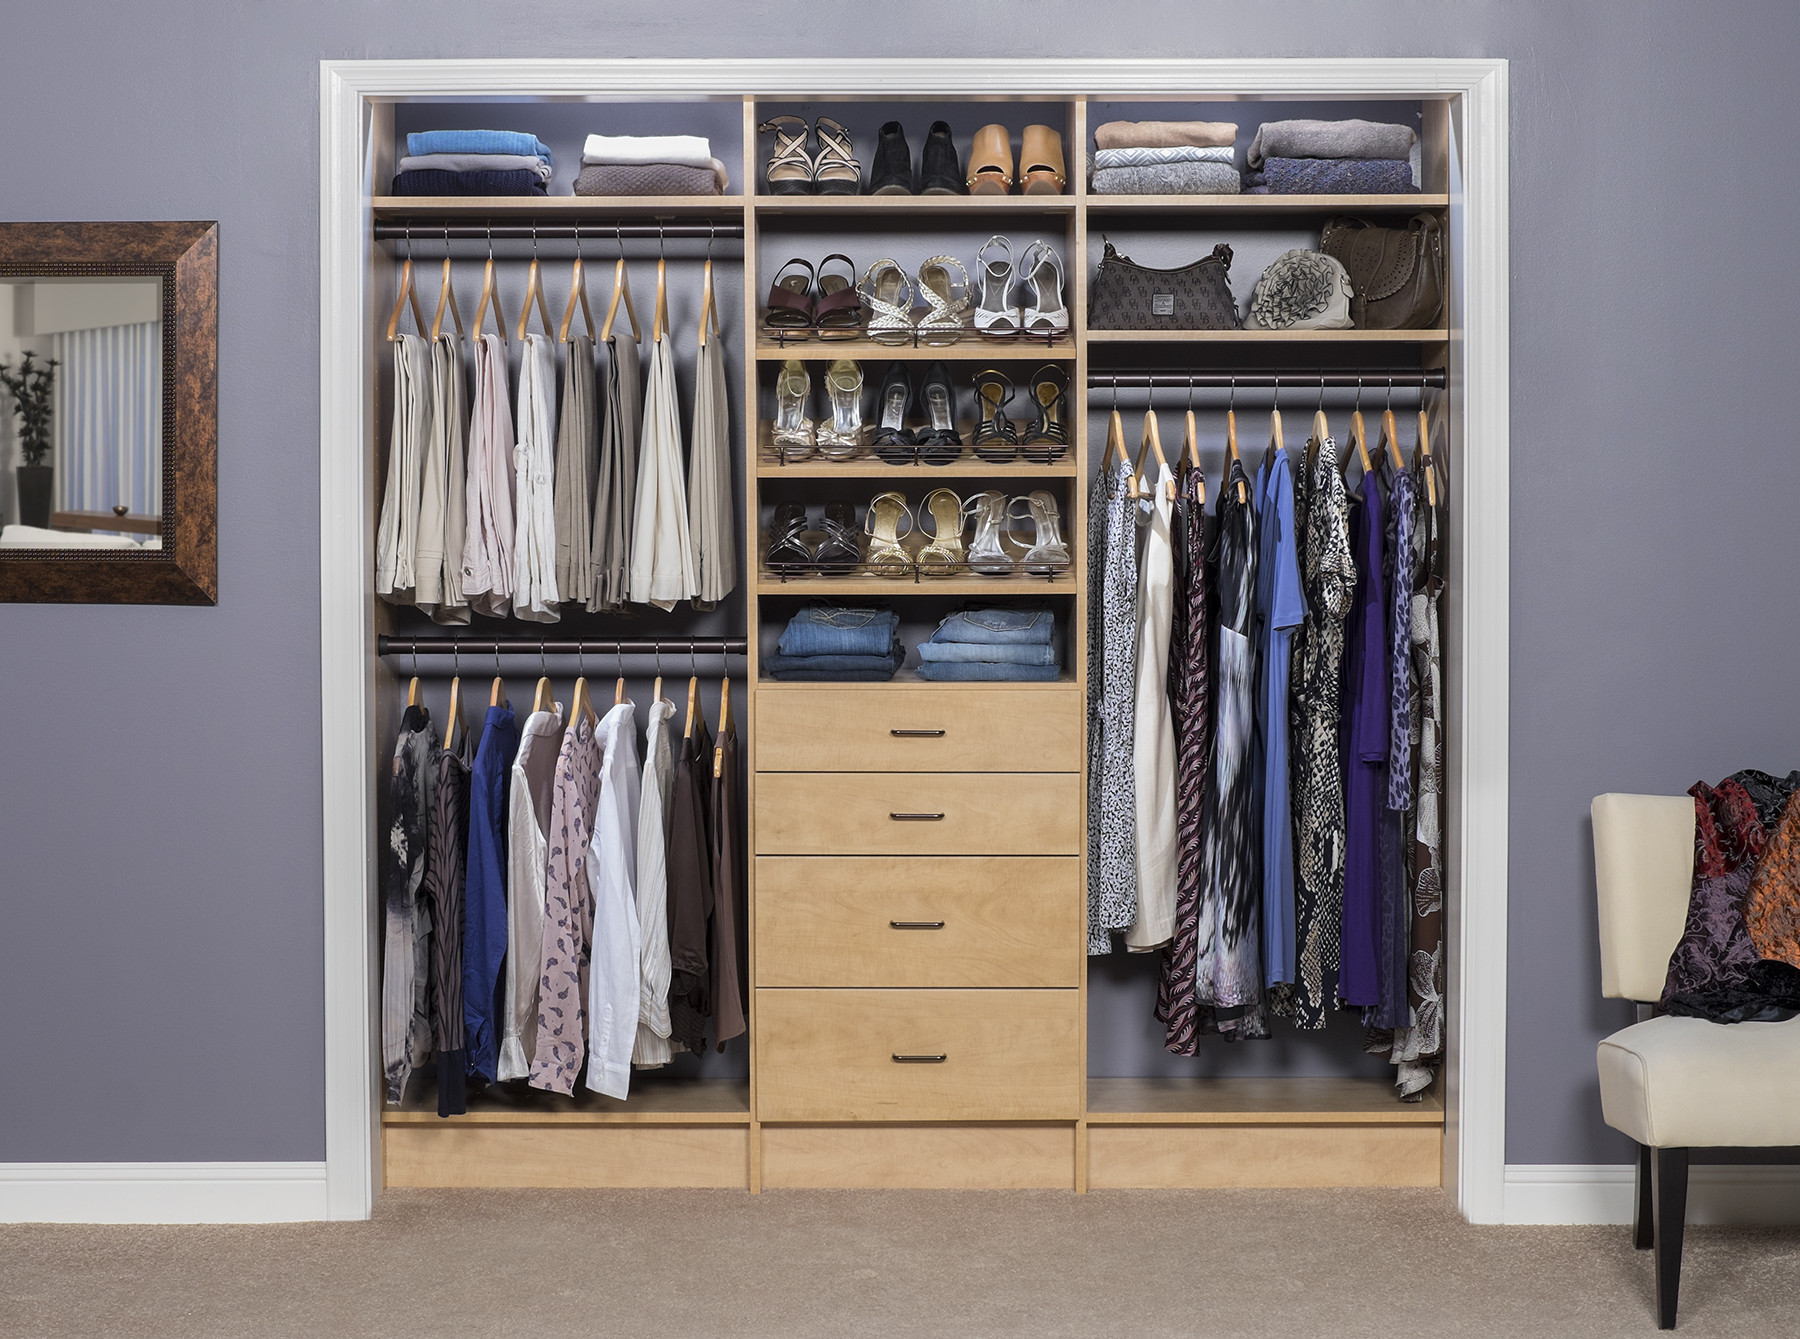 Organizeing Closet and Pantries Resume Sample Great Expectations – before and after Closet Designs. – Space Age …